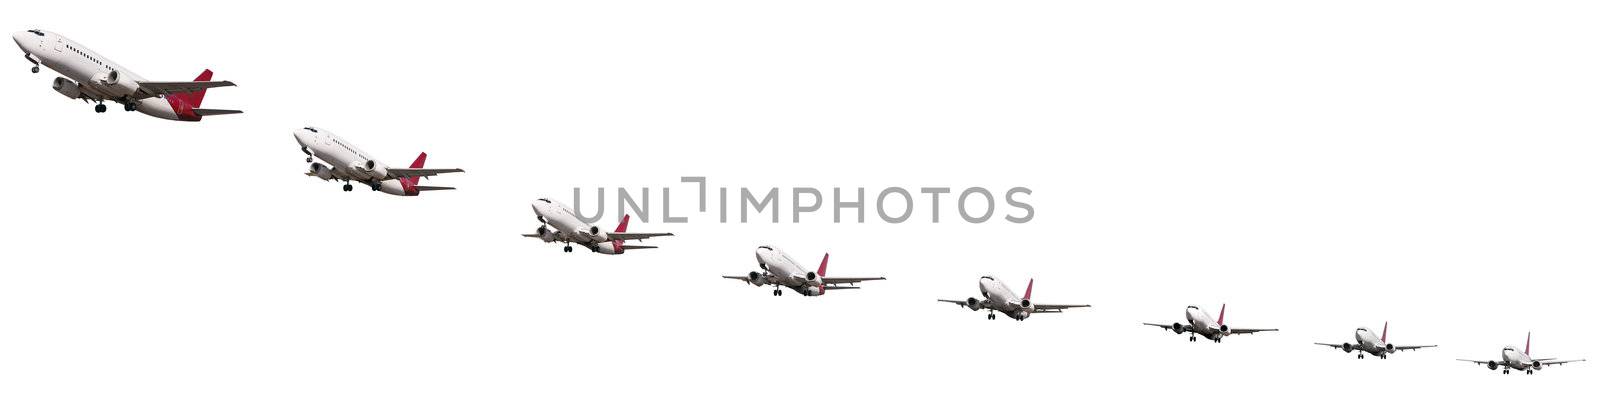 Sequence of airplane takeoff by pierivb